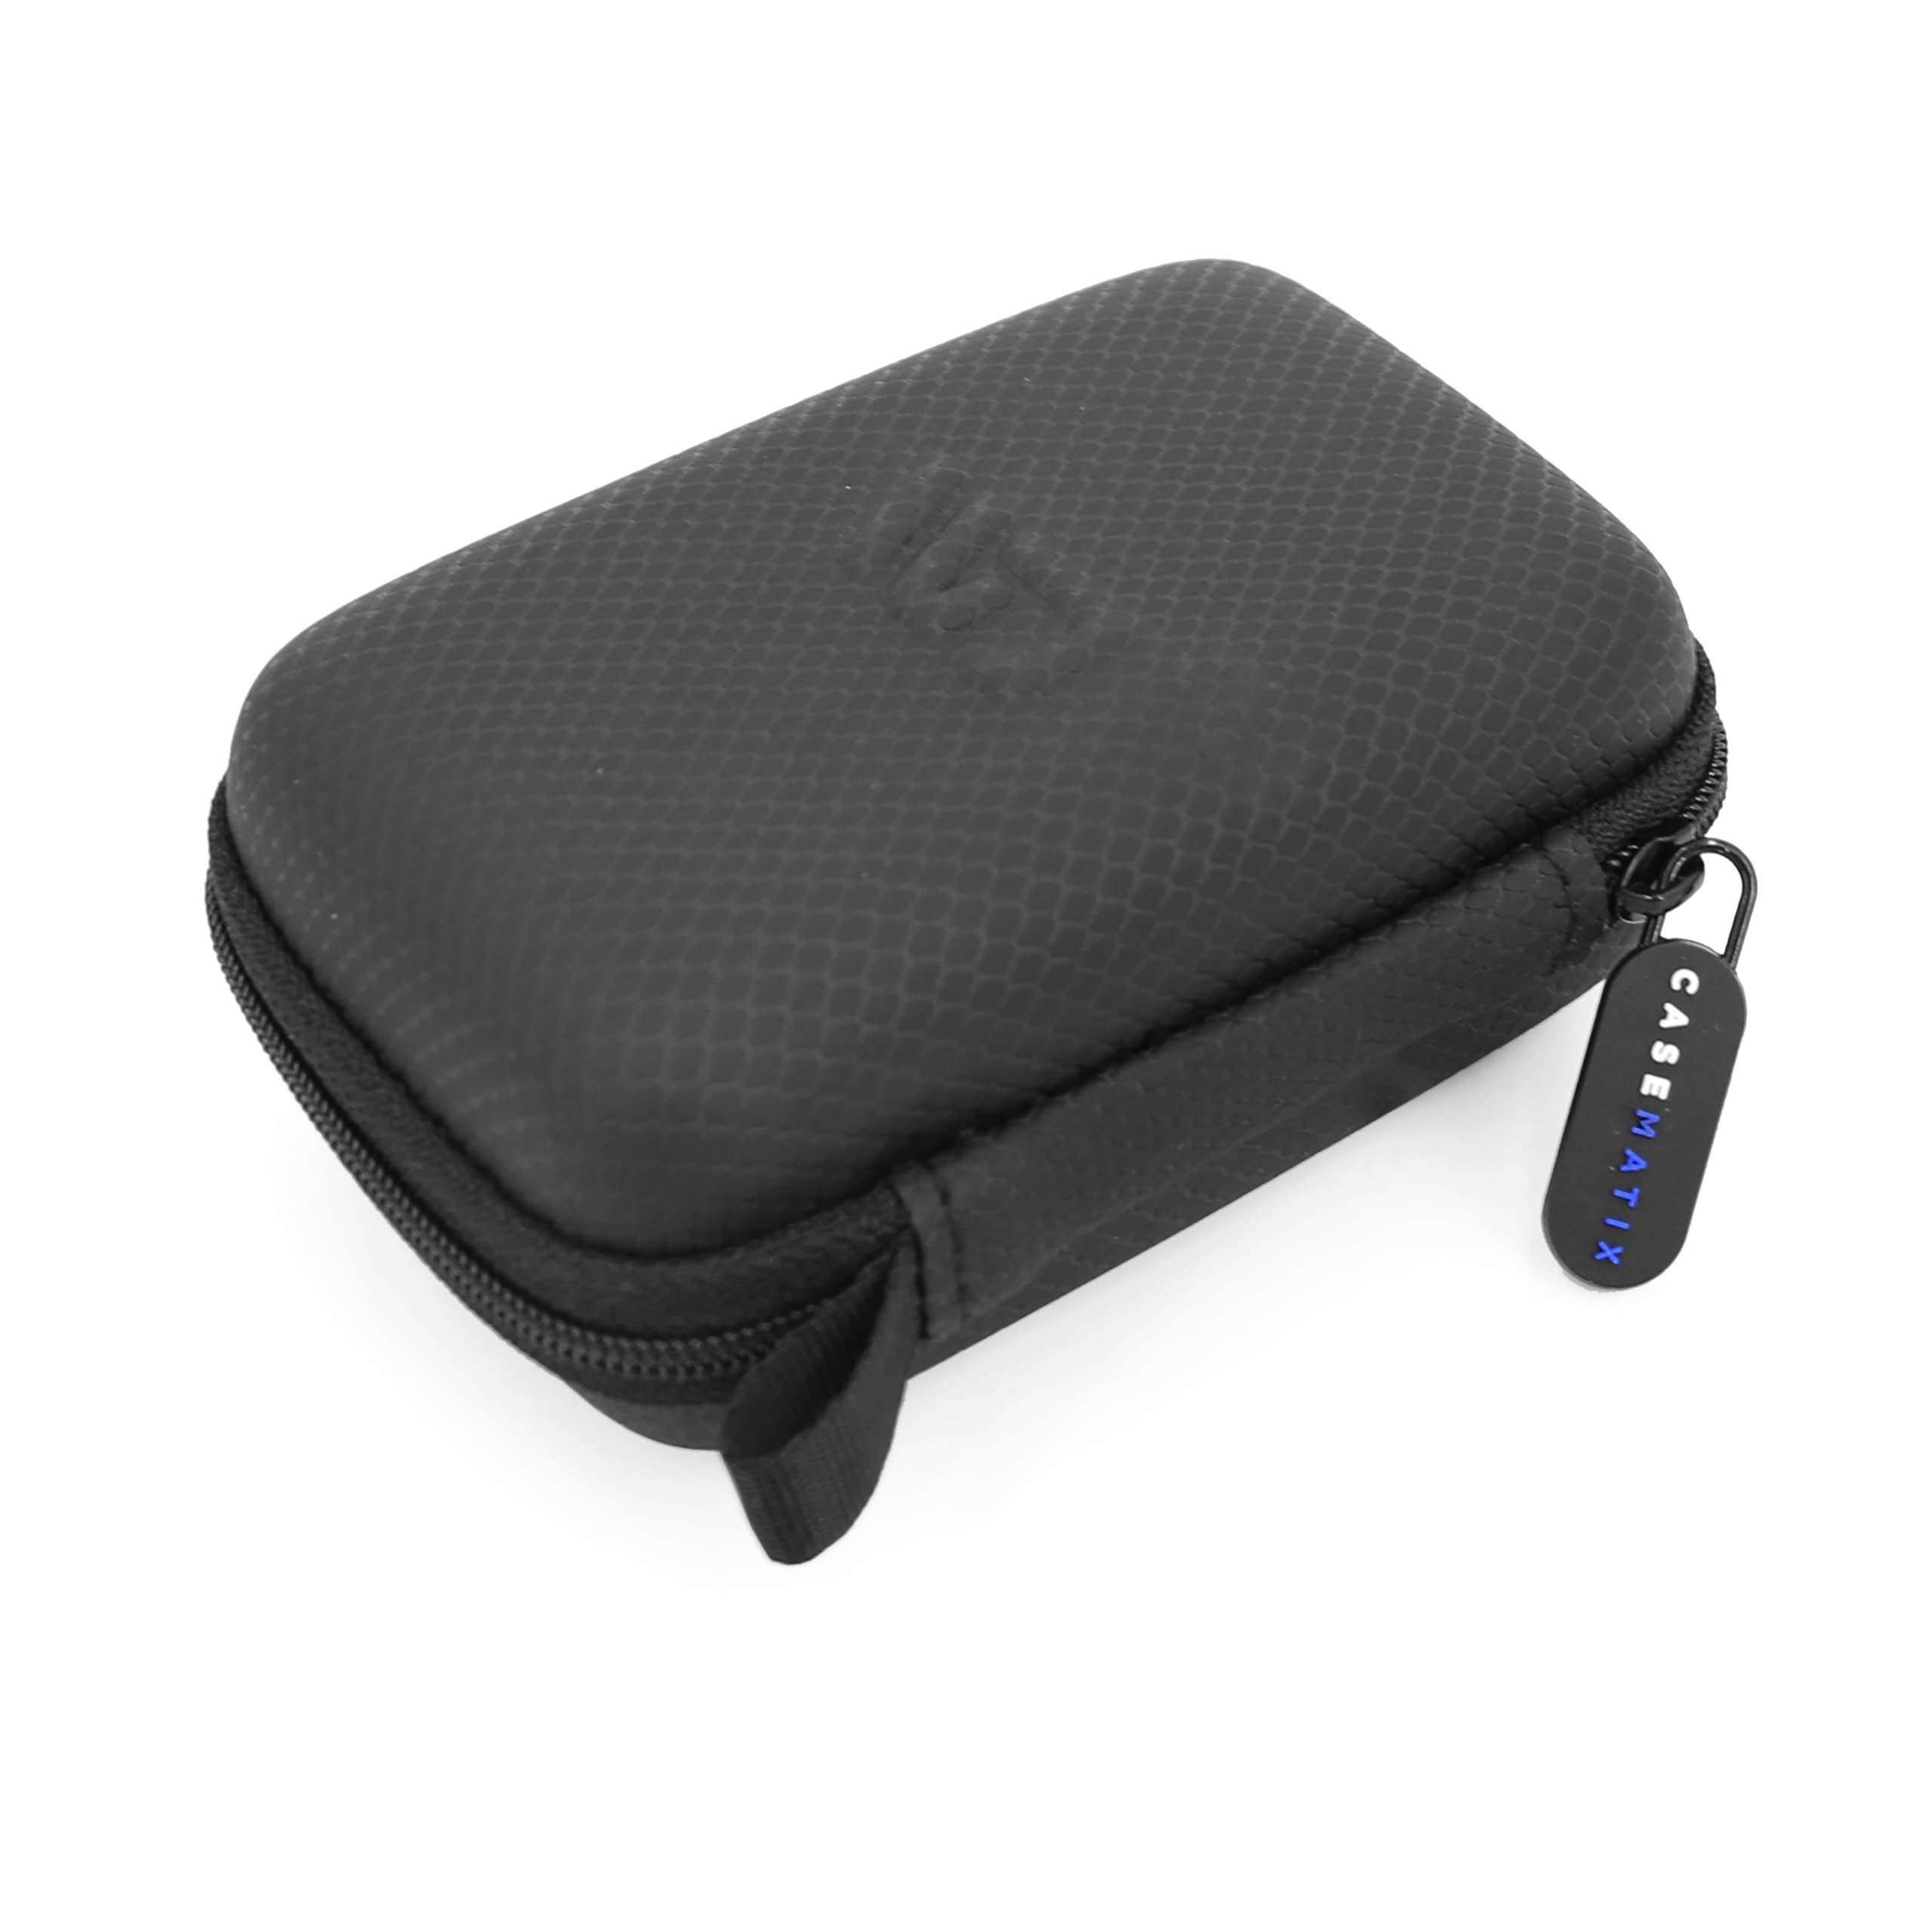 CASEMATIX Travel Case for Contact Lenses Fits 12 Daily Disposable Contacts in a Compact Dual-sided Storage Case with Clip On Carabiner - Includes Contact Lens Case Only